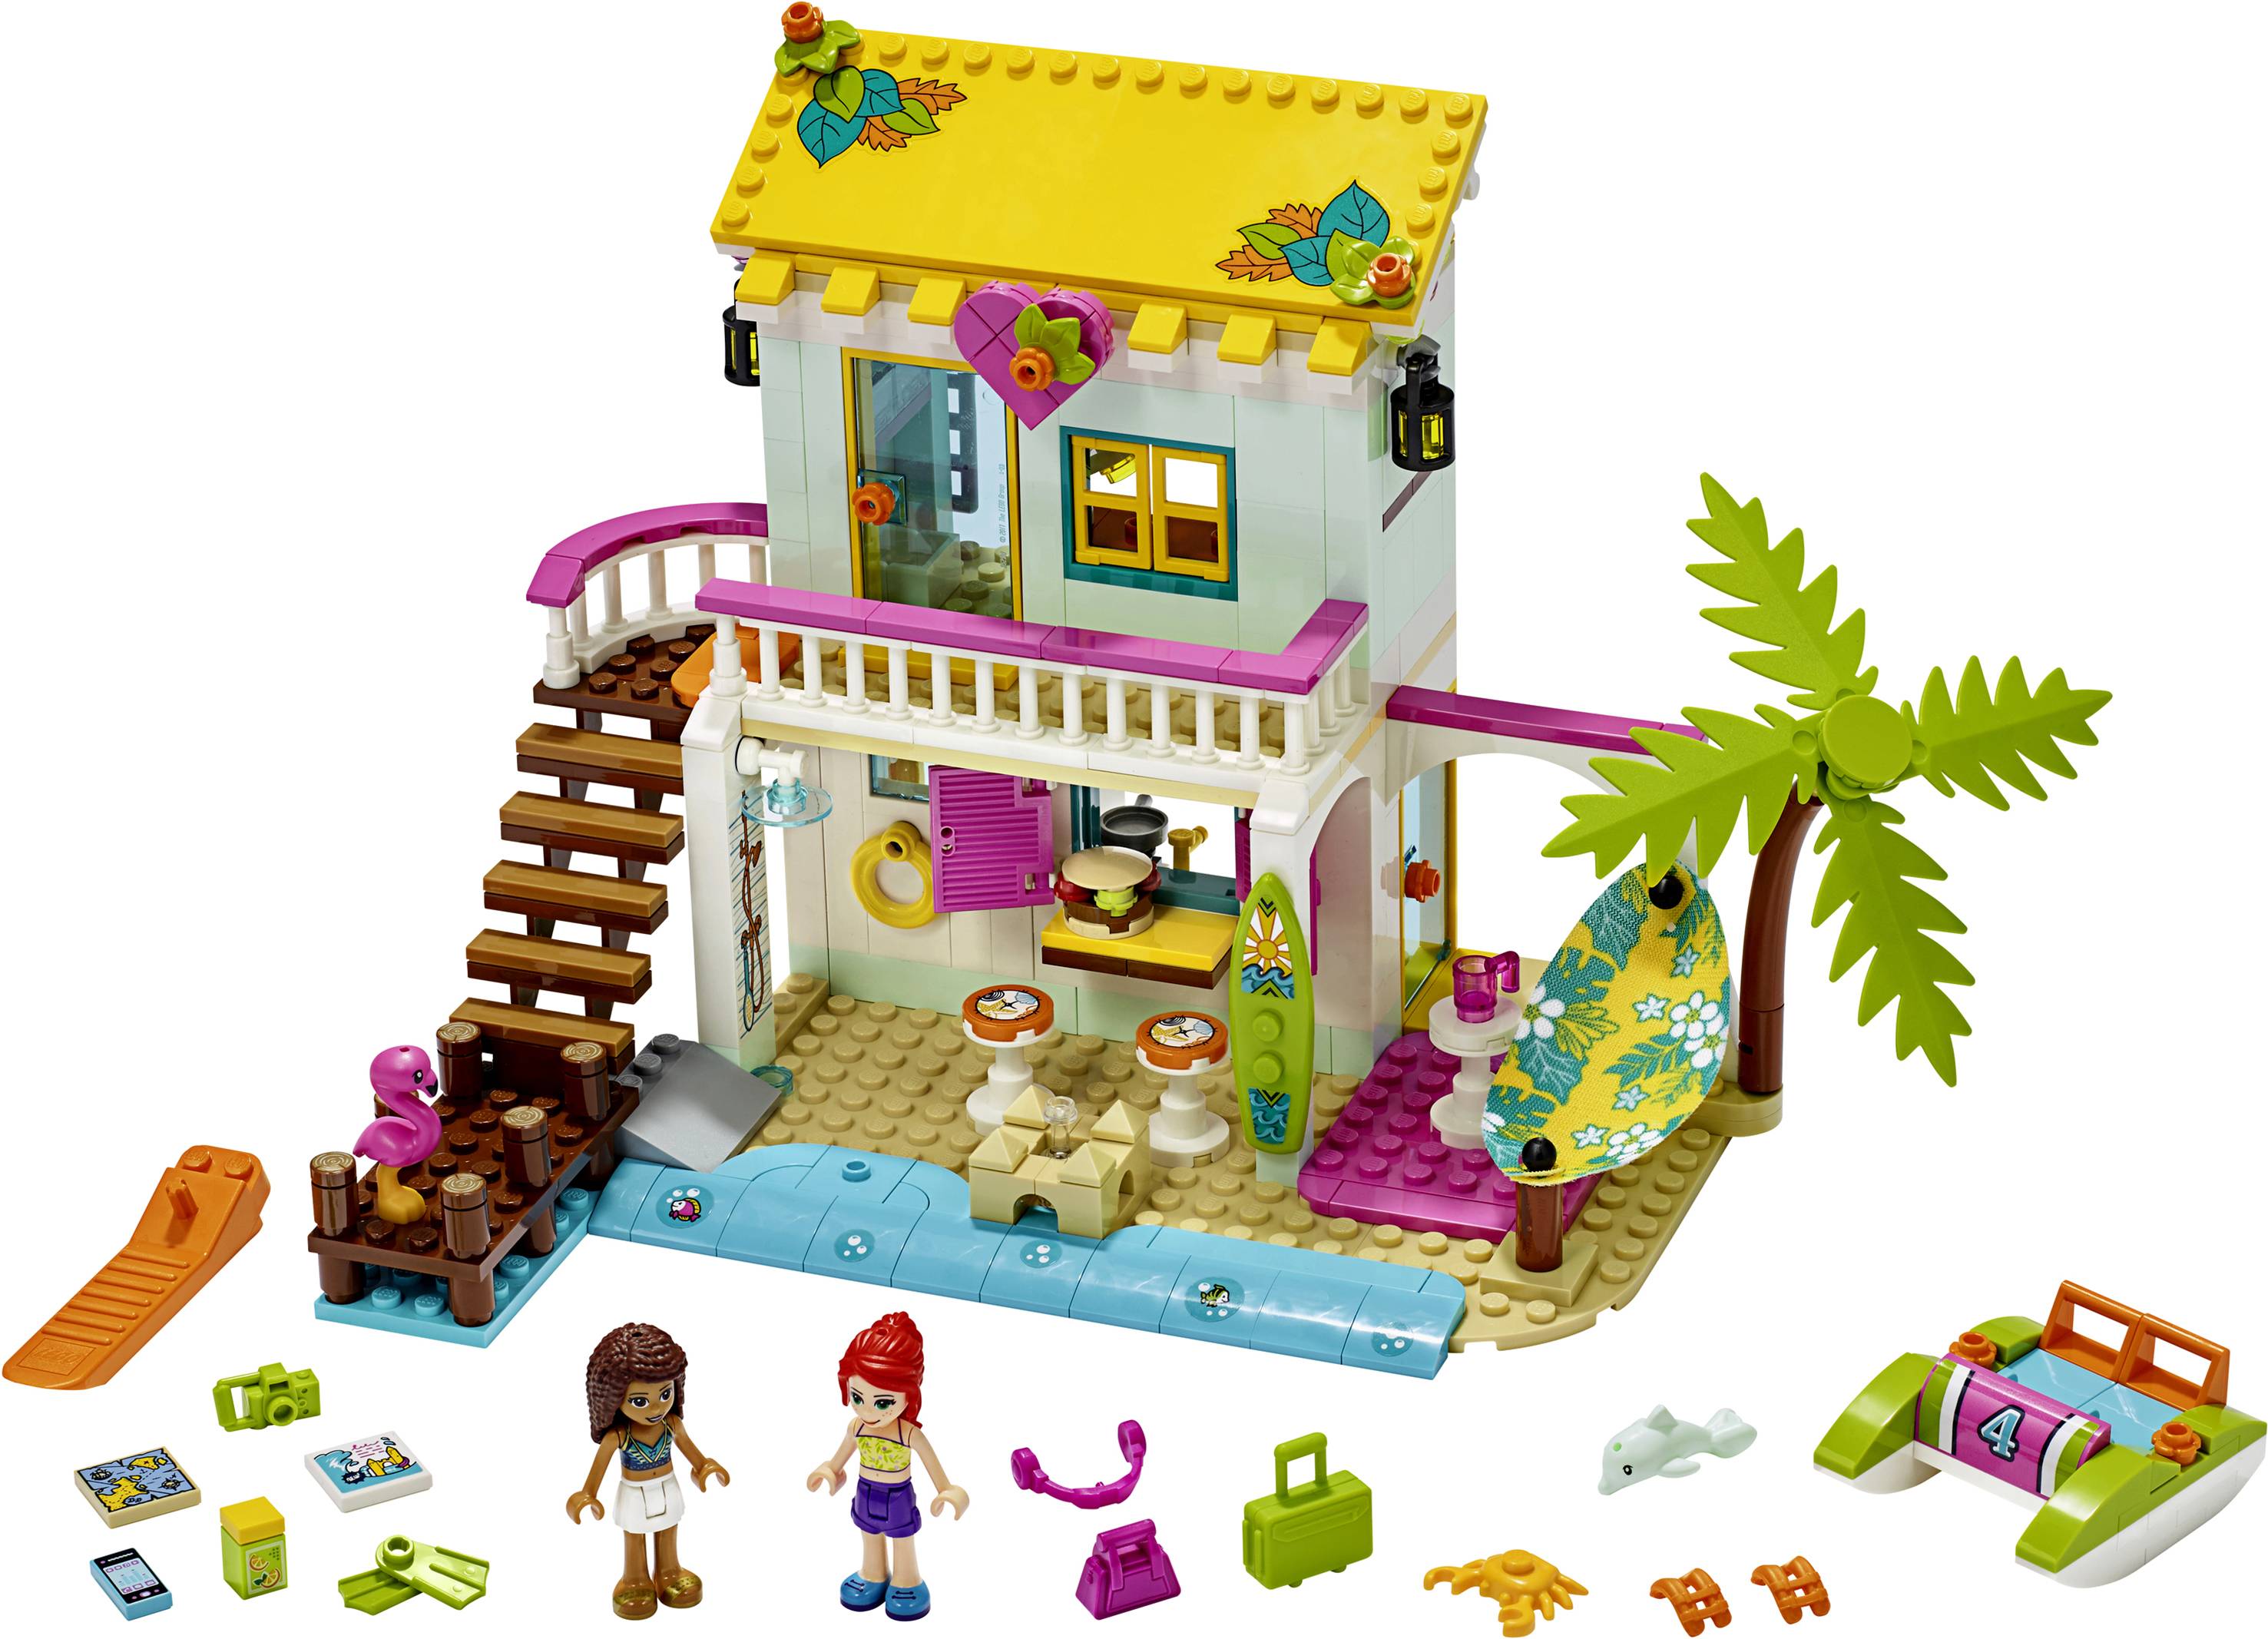 Pijlpunt bewijs Plasticiteit 41428 LEGO® FRIENDS Beach house with pedal boat | Conrad.com